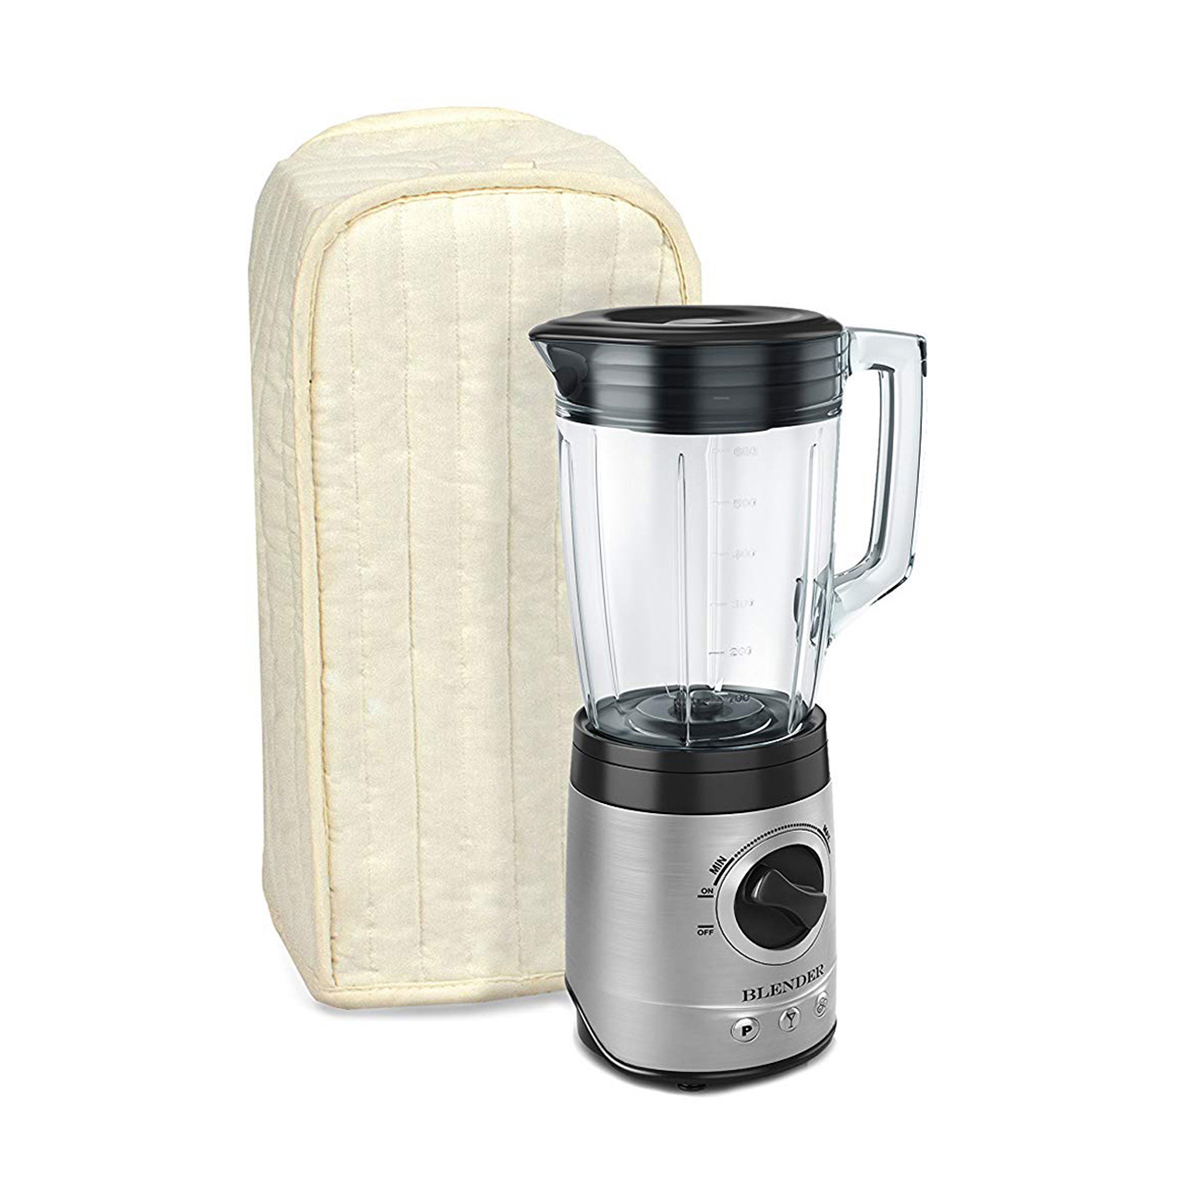 Quilted-Polyester-Kitchen-Blender-Appliance-Cover-Dust-proof-Protection-Case-Bag-1568082-6